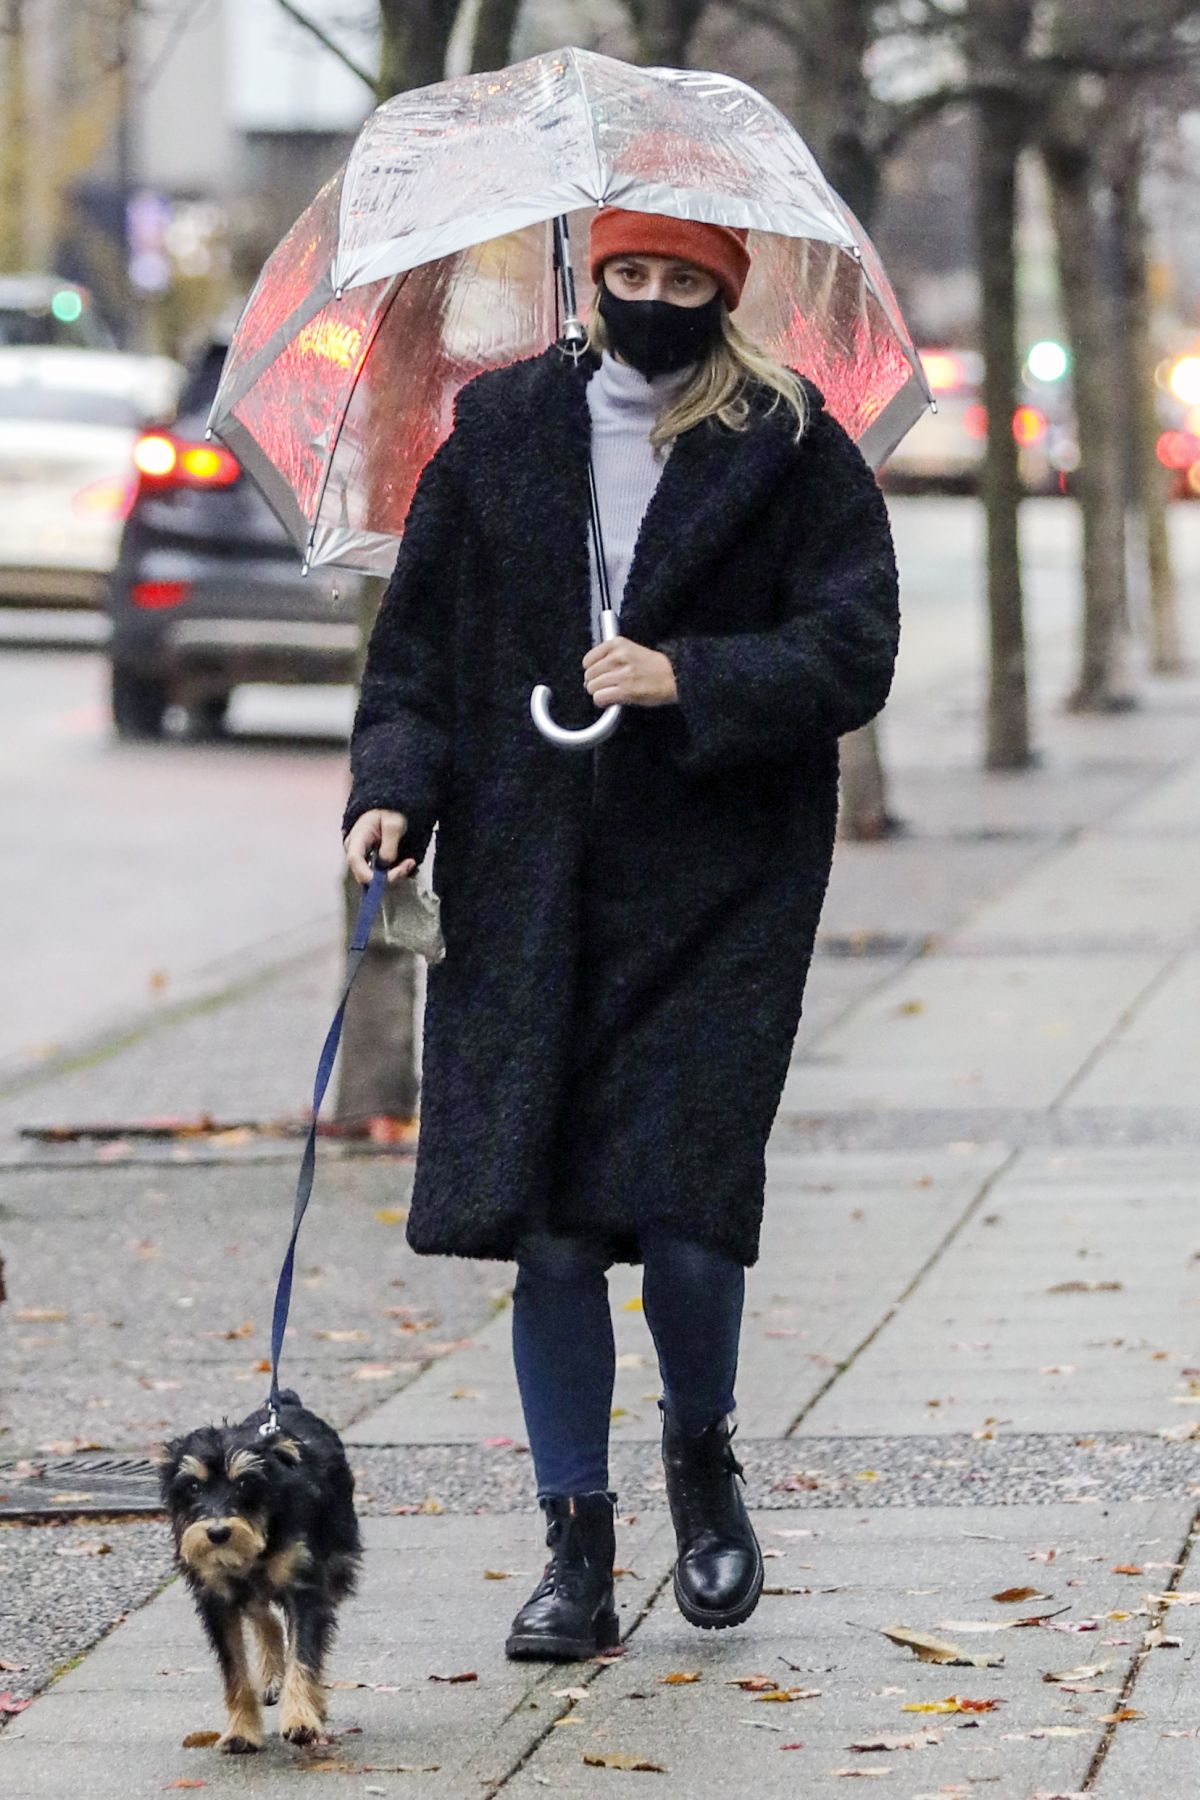 lili-reinhart-out-with-her-dog-in-vancouver-11-14-2020-11.jpg